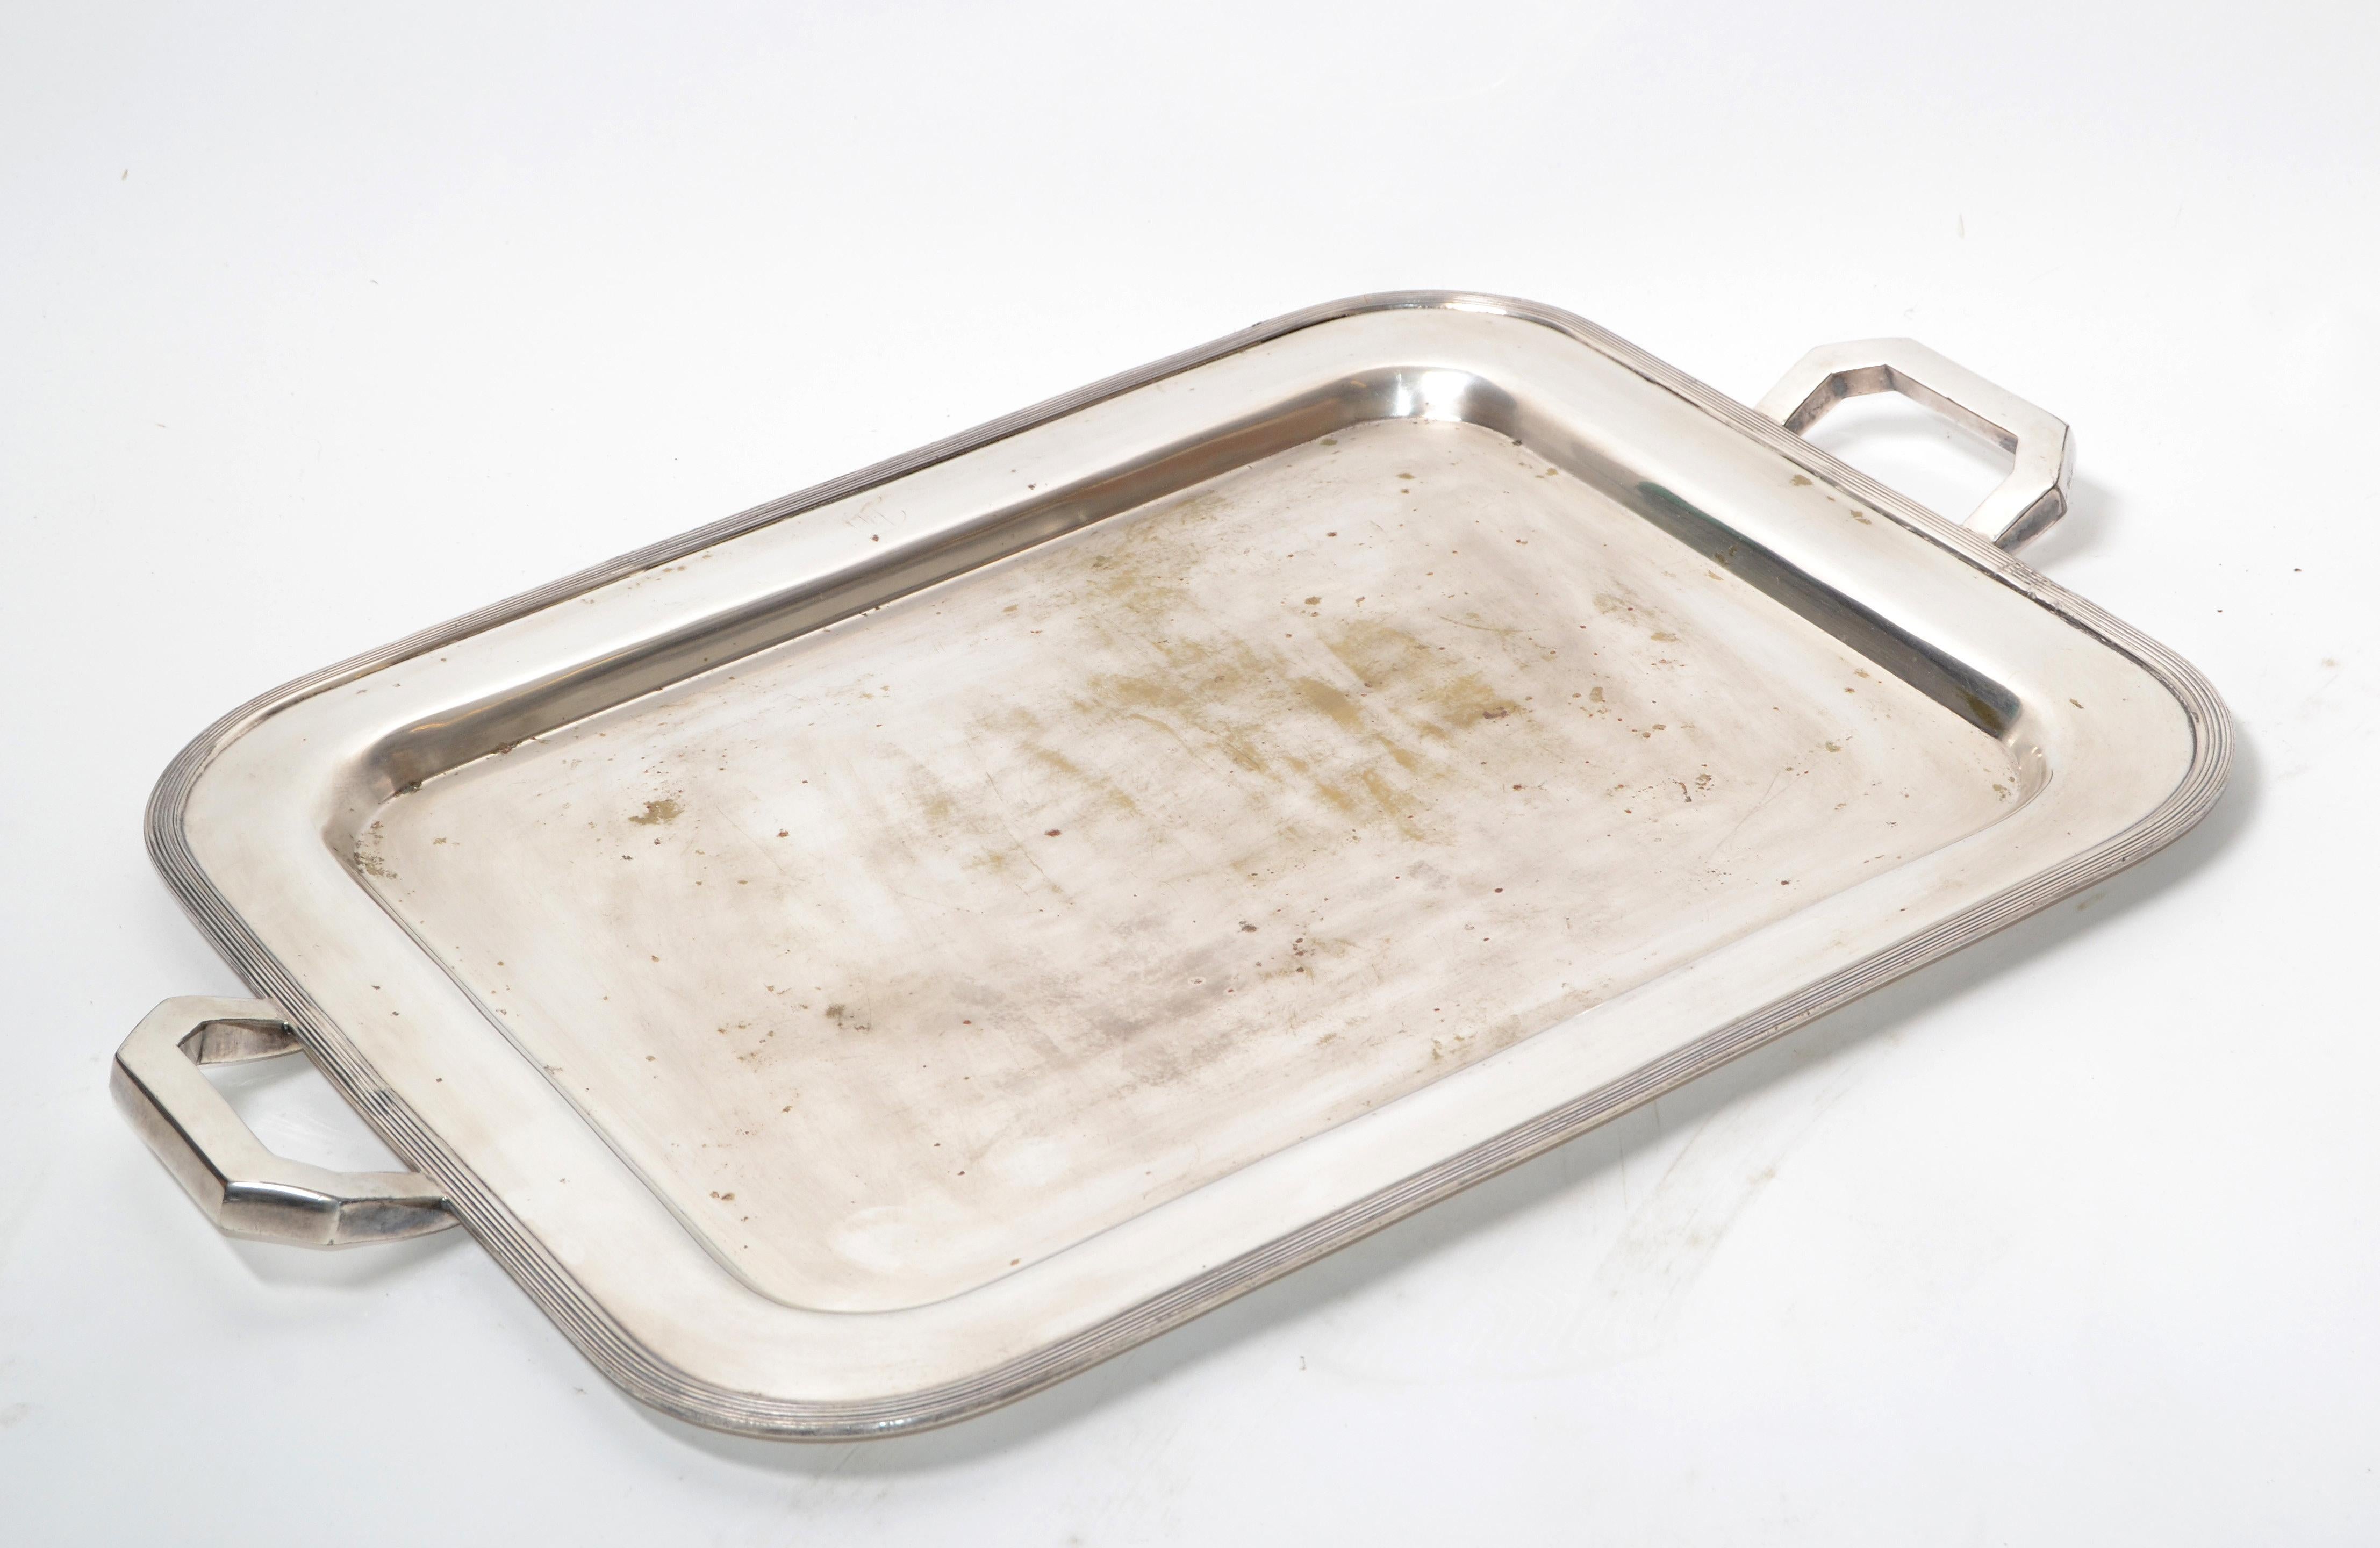 British Colonial style old English silver plate over nickel rectangular serving tray, platter with ornate border.
It is in original vintage condition and has some stains and is tarnished.
Trade Mark D and numbered at the base.
Serving Tray Size: